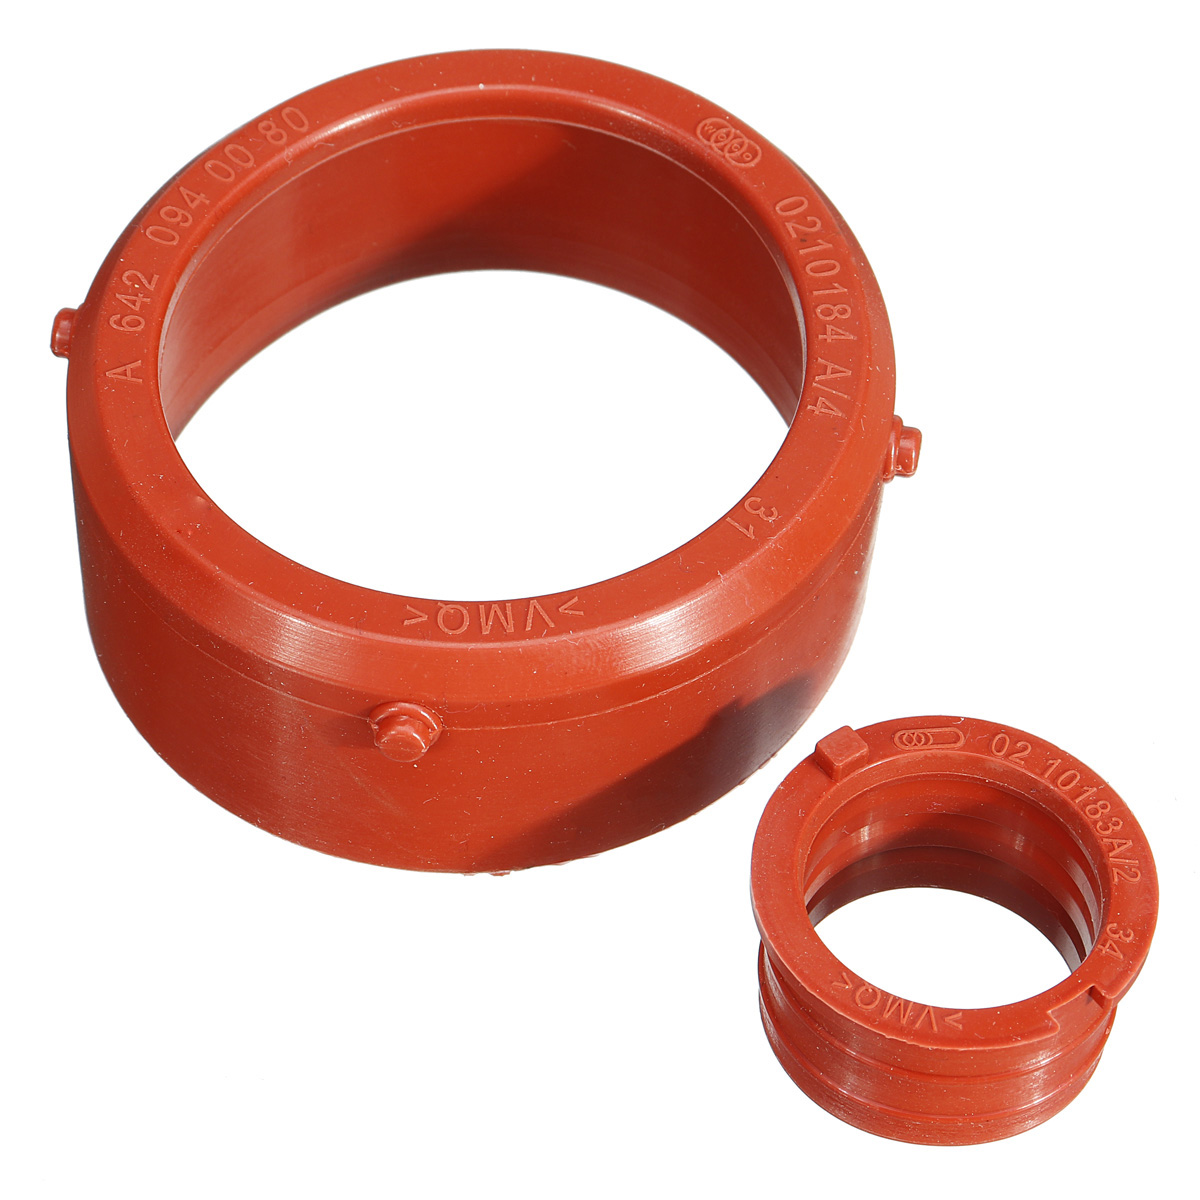 2pcs-Red-Turbo--Breather-Intake-Seal-Kit-For-Mercedes-Benz-OM642-A6420940080-A6420940580-1747599-9